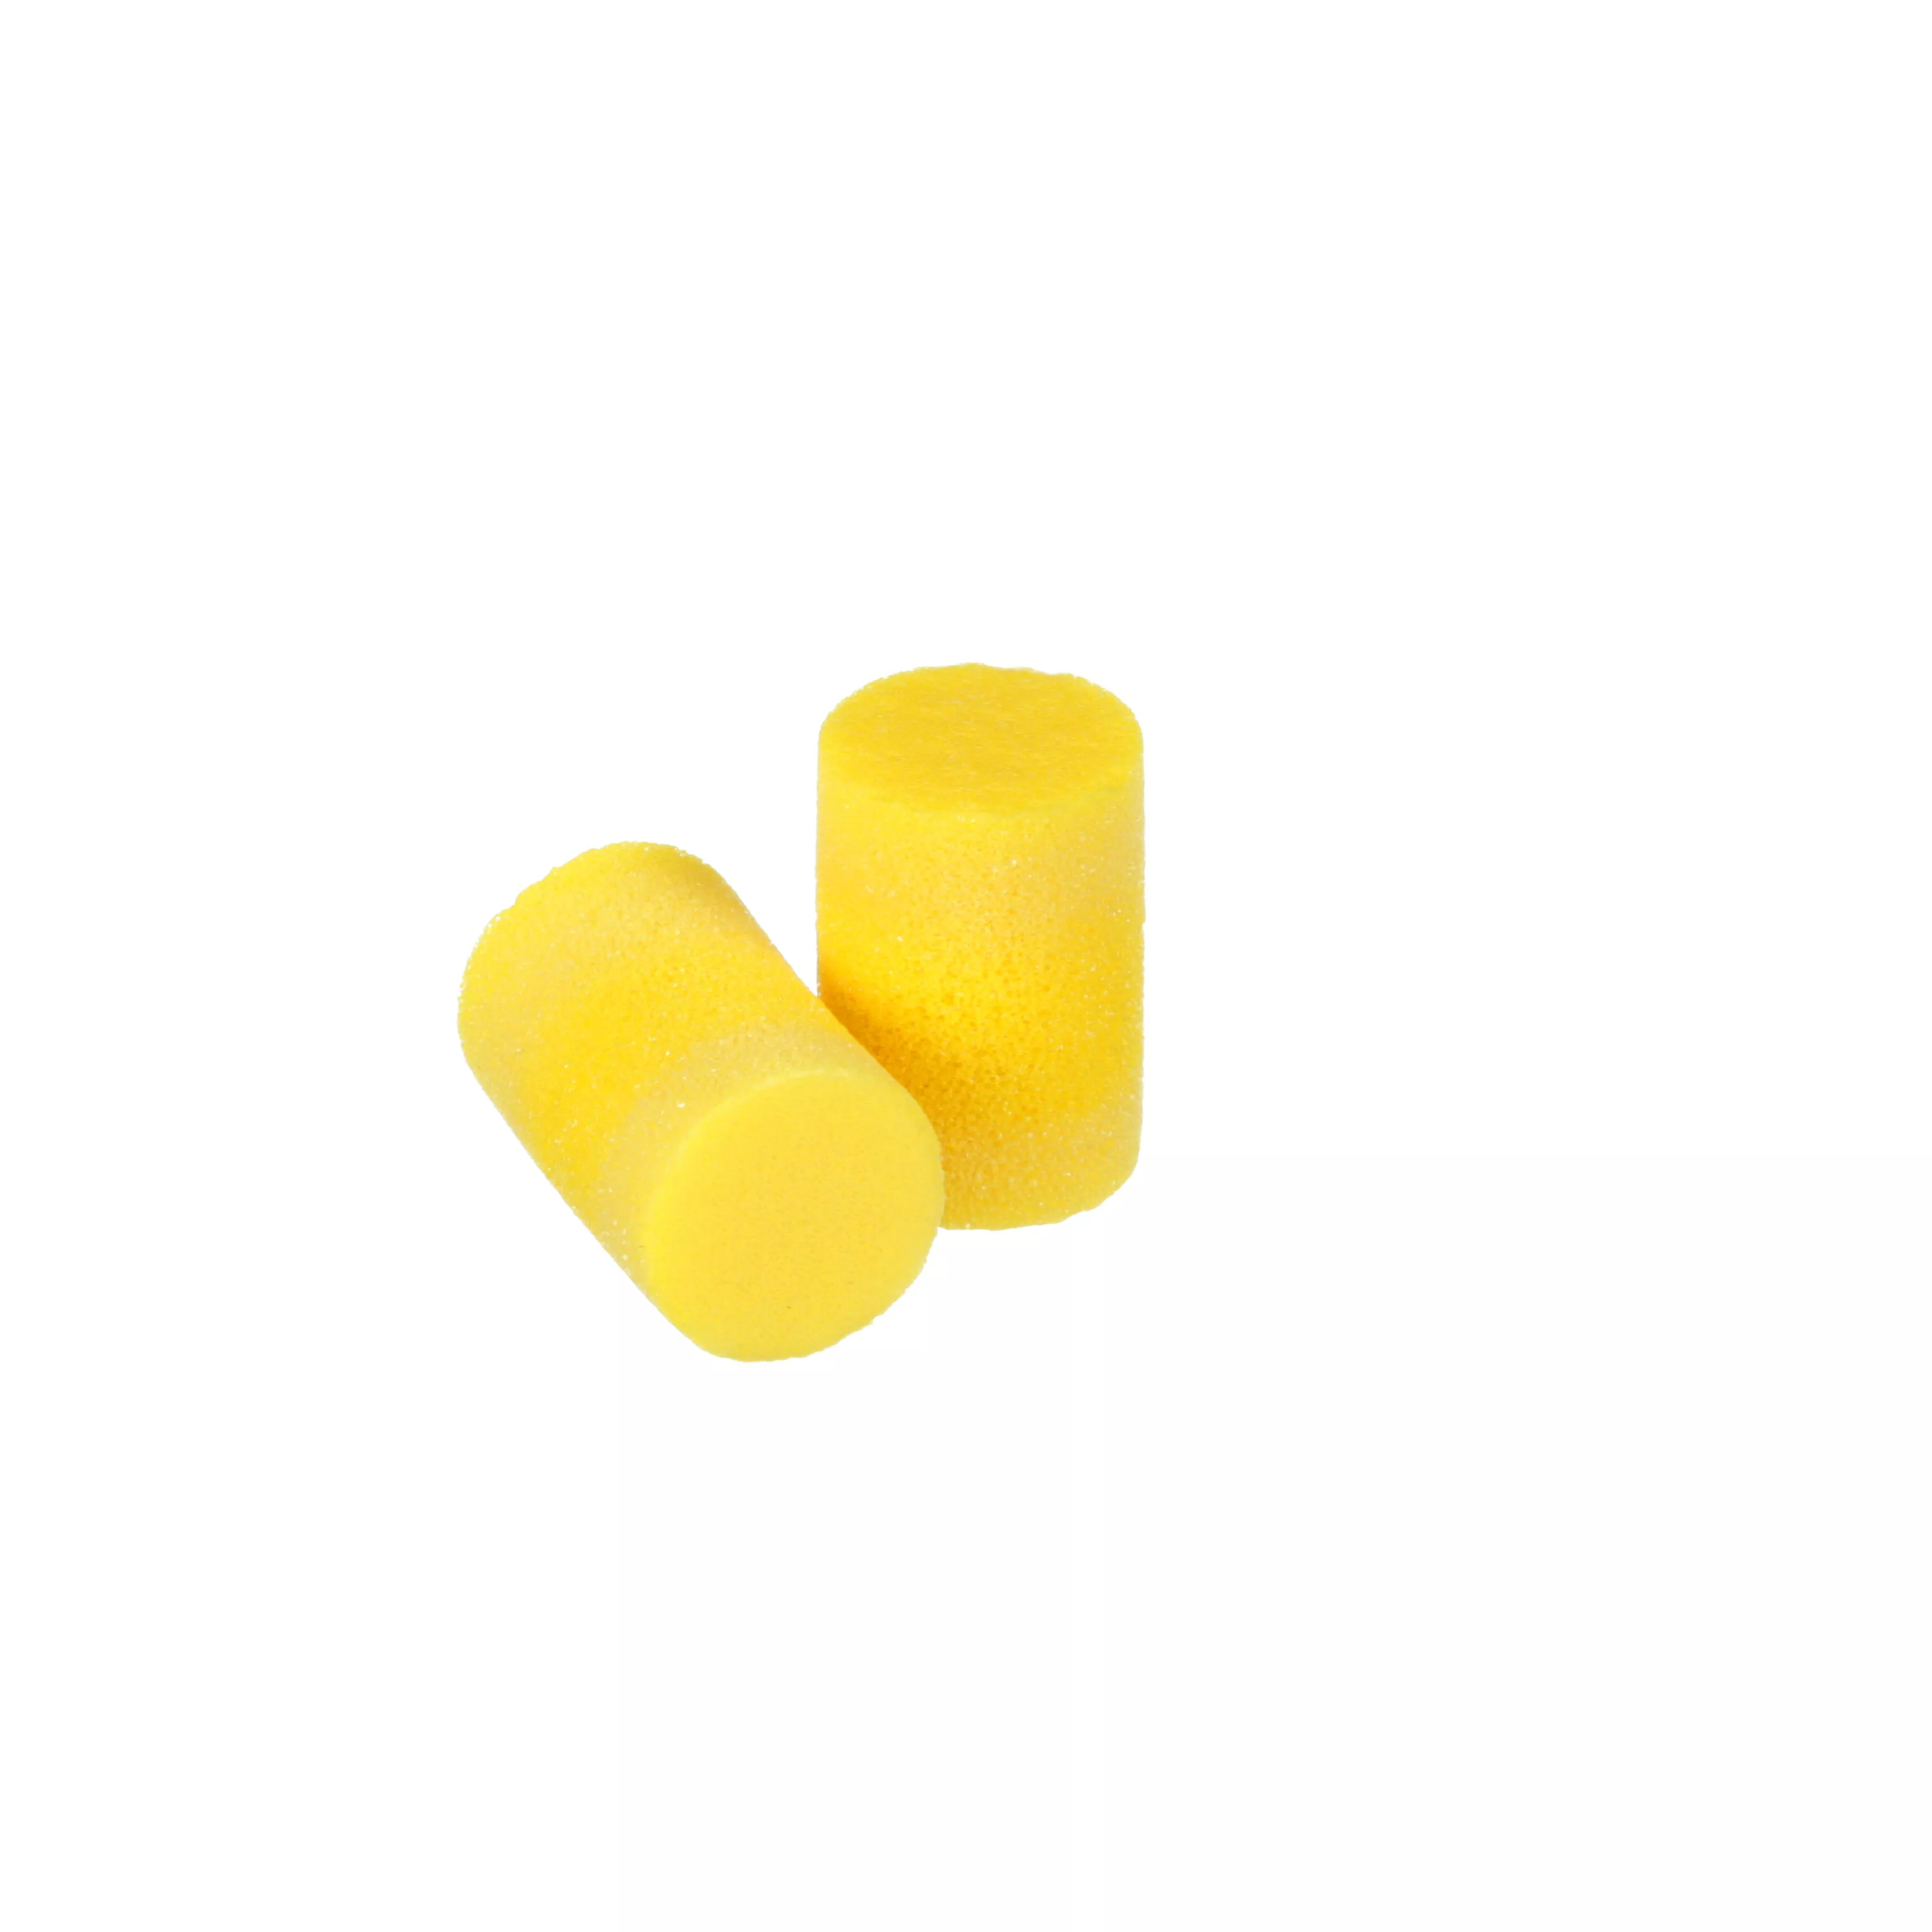 3M™ E-A-R™ Classic™ Earplugs 310-1103, Uncorded, Small Size, Pillow
Pack, 2000 Pair/Case